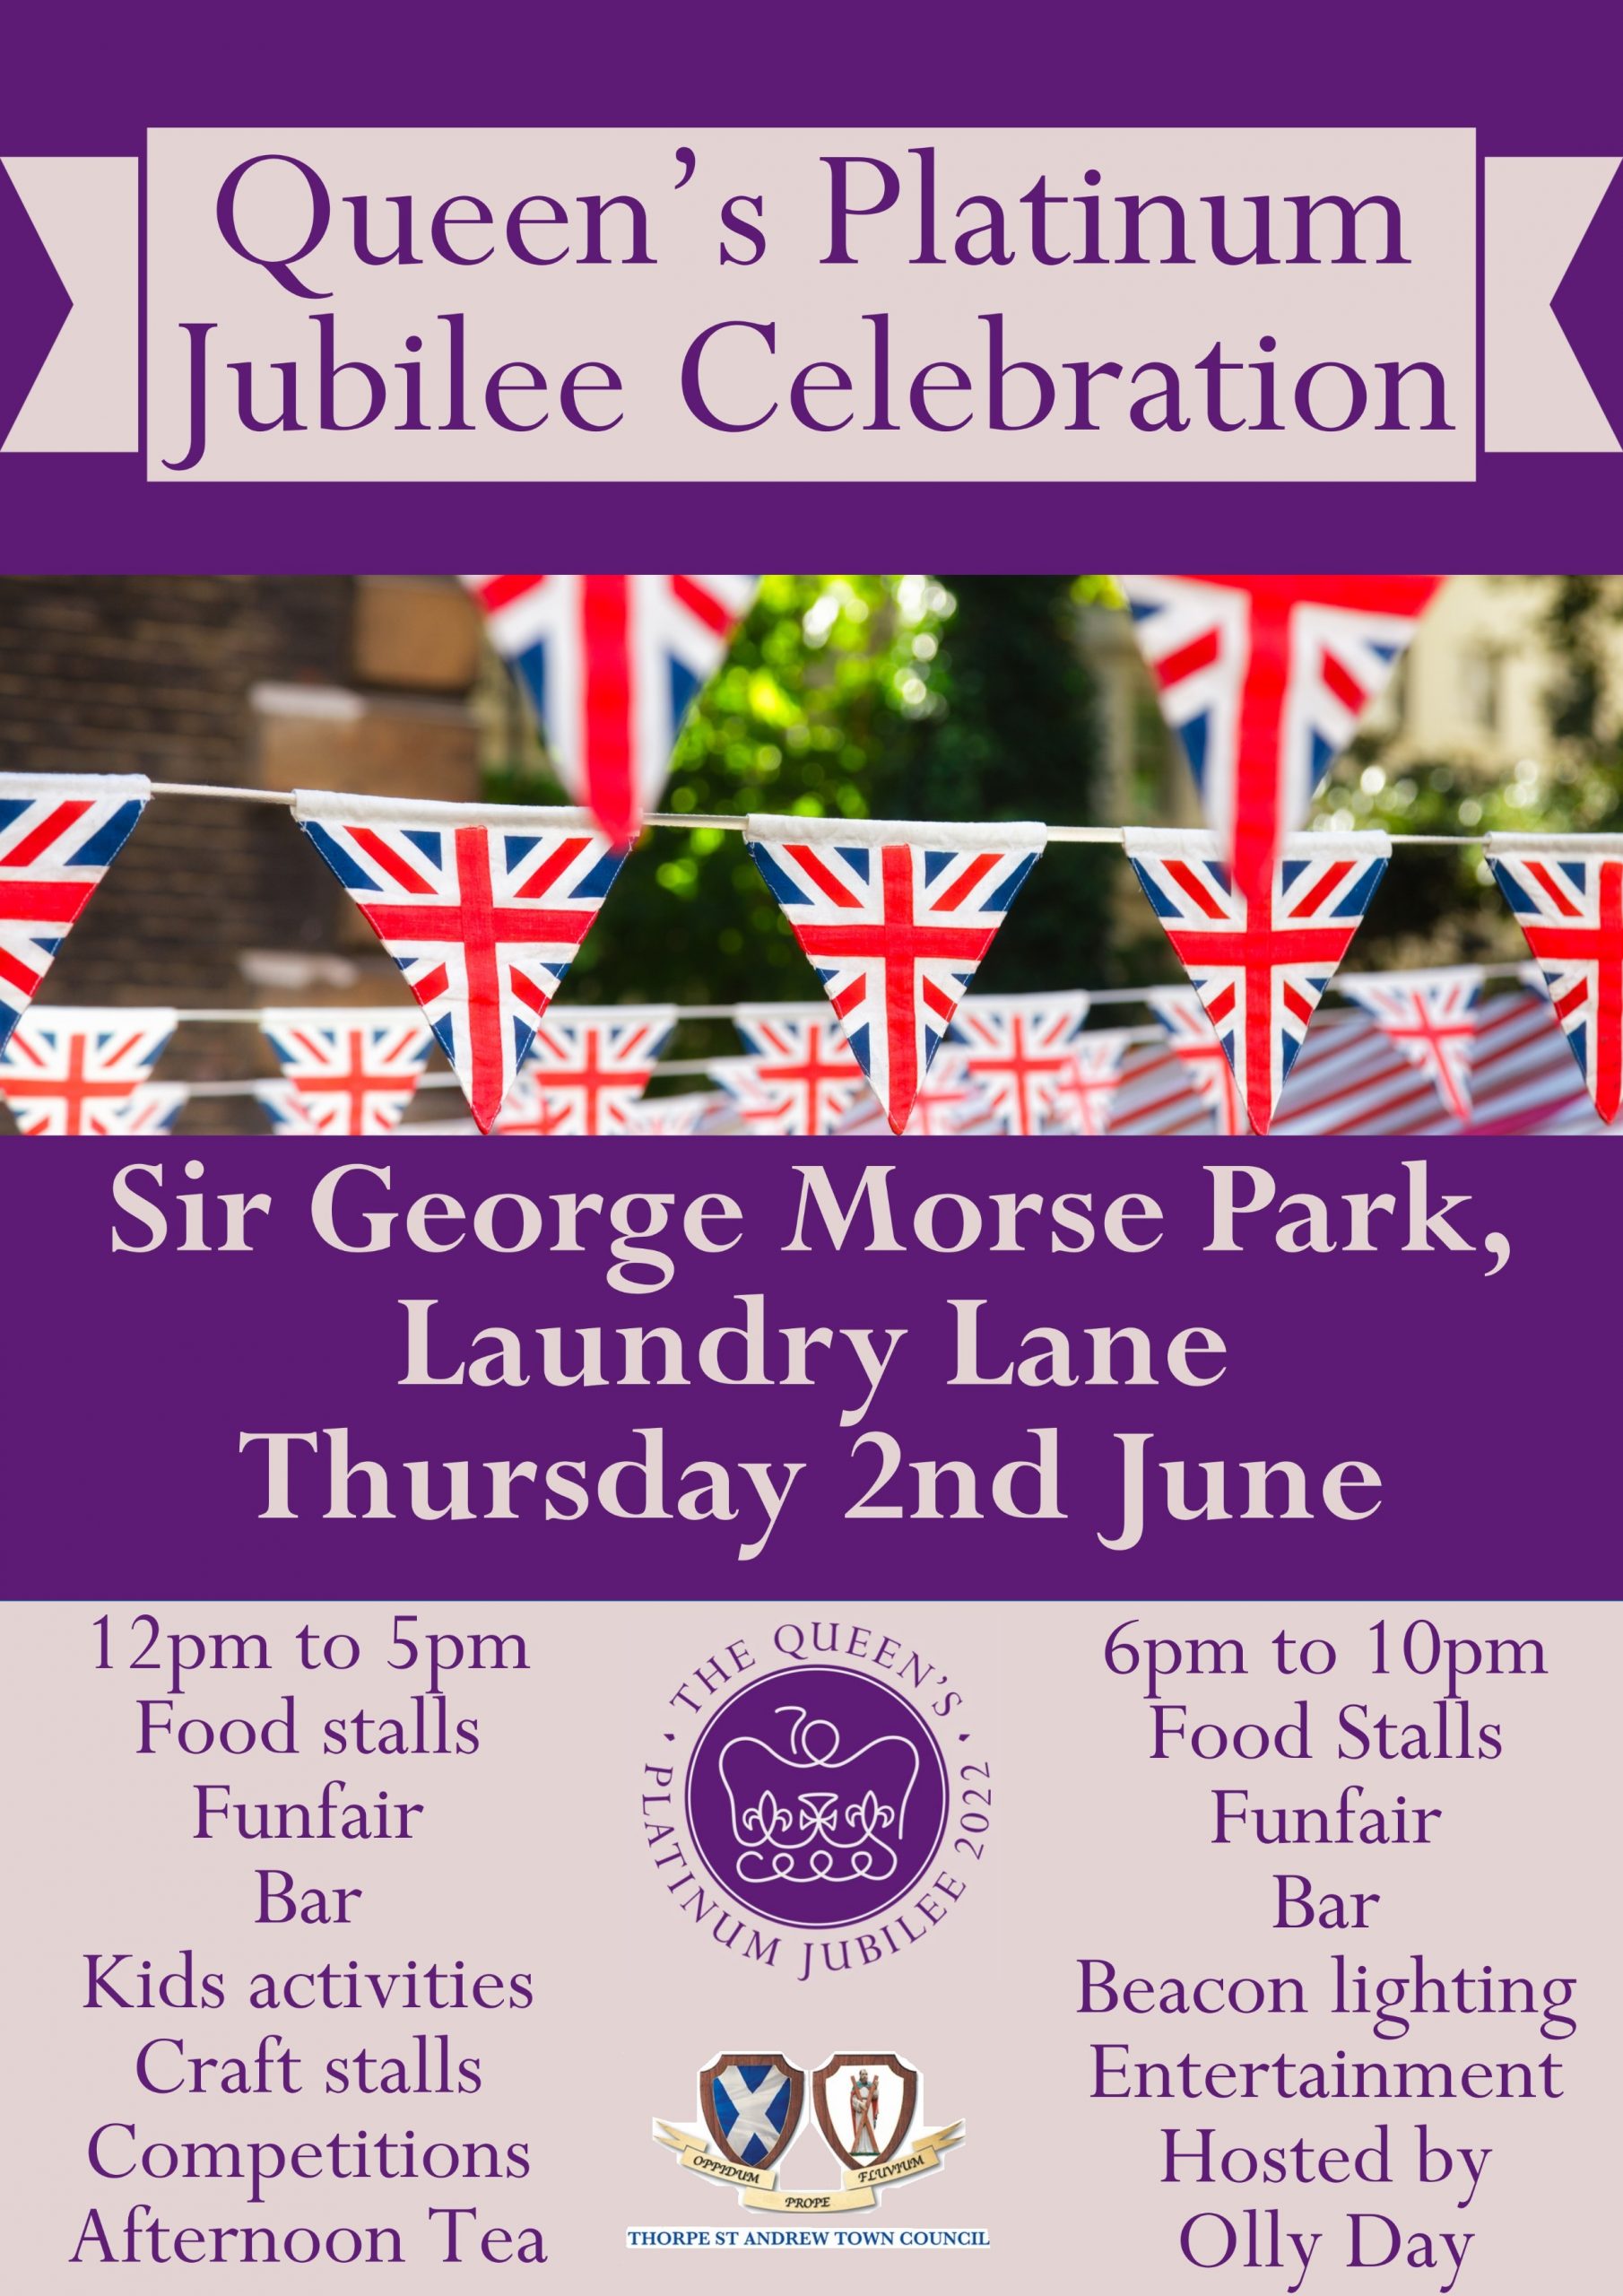 Jubilee Celebration. Sir George Morse Park, Laundry Lane, Thursday 2nd June 2022. 12pm to 5pm Food stalls Funfair Bar Kids activities Craft stalls Competitions Afternoon Tea . 6pm to 10pm Food Stalls Funfair Bar Beacon lighting Entertainment Hosted by Olly Day  